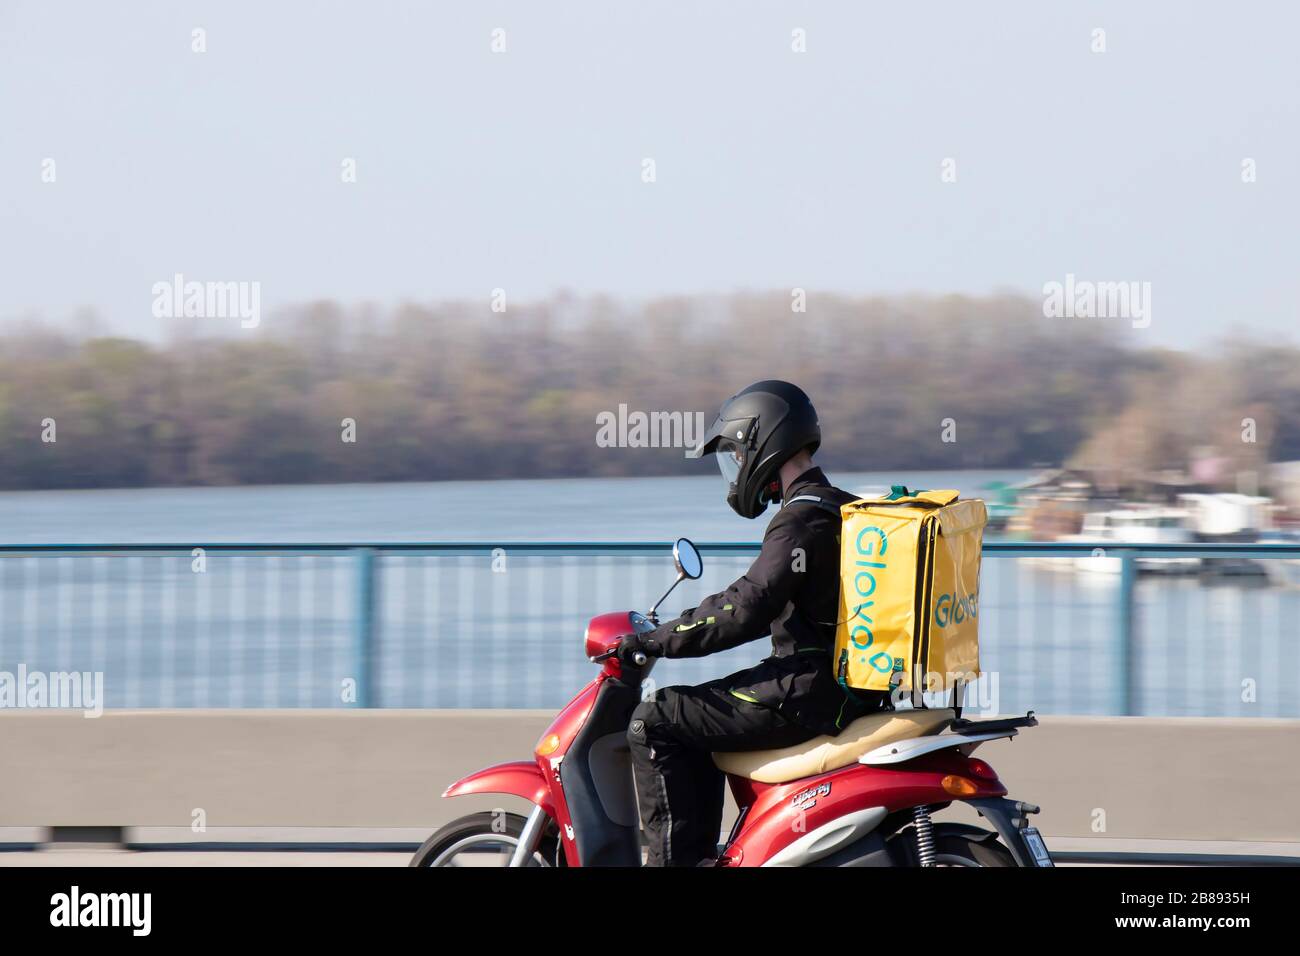 Belgrade, Serbia - March 18, 2020 : A courier working for Glovo food delivery service riding a scooter bike on the bridge over the Sava river Stock Photo